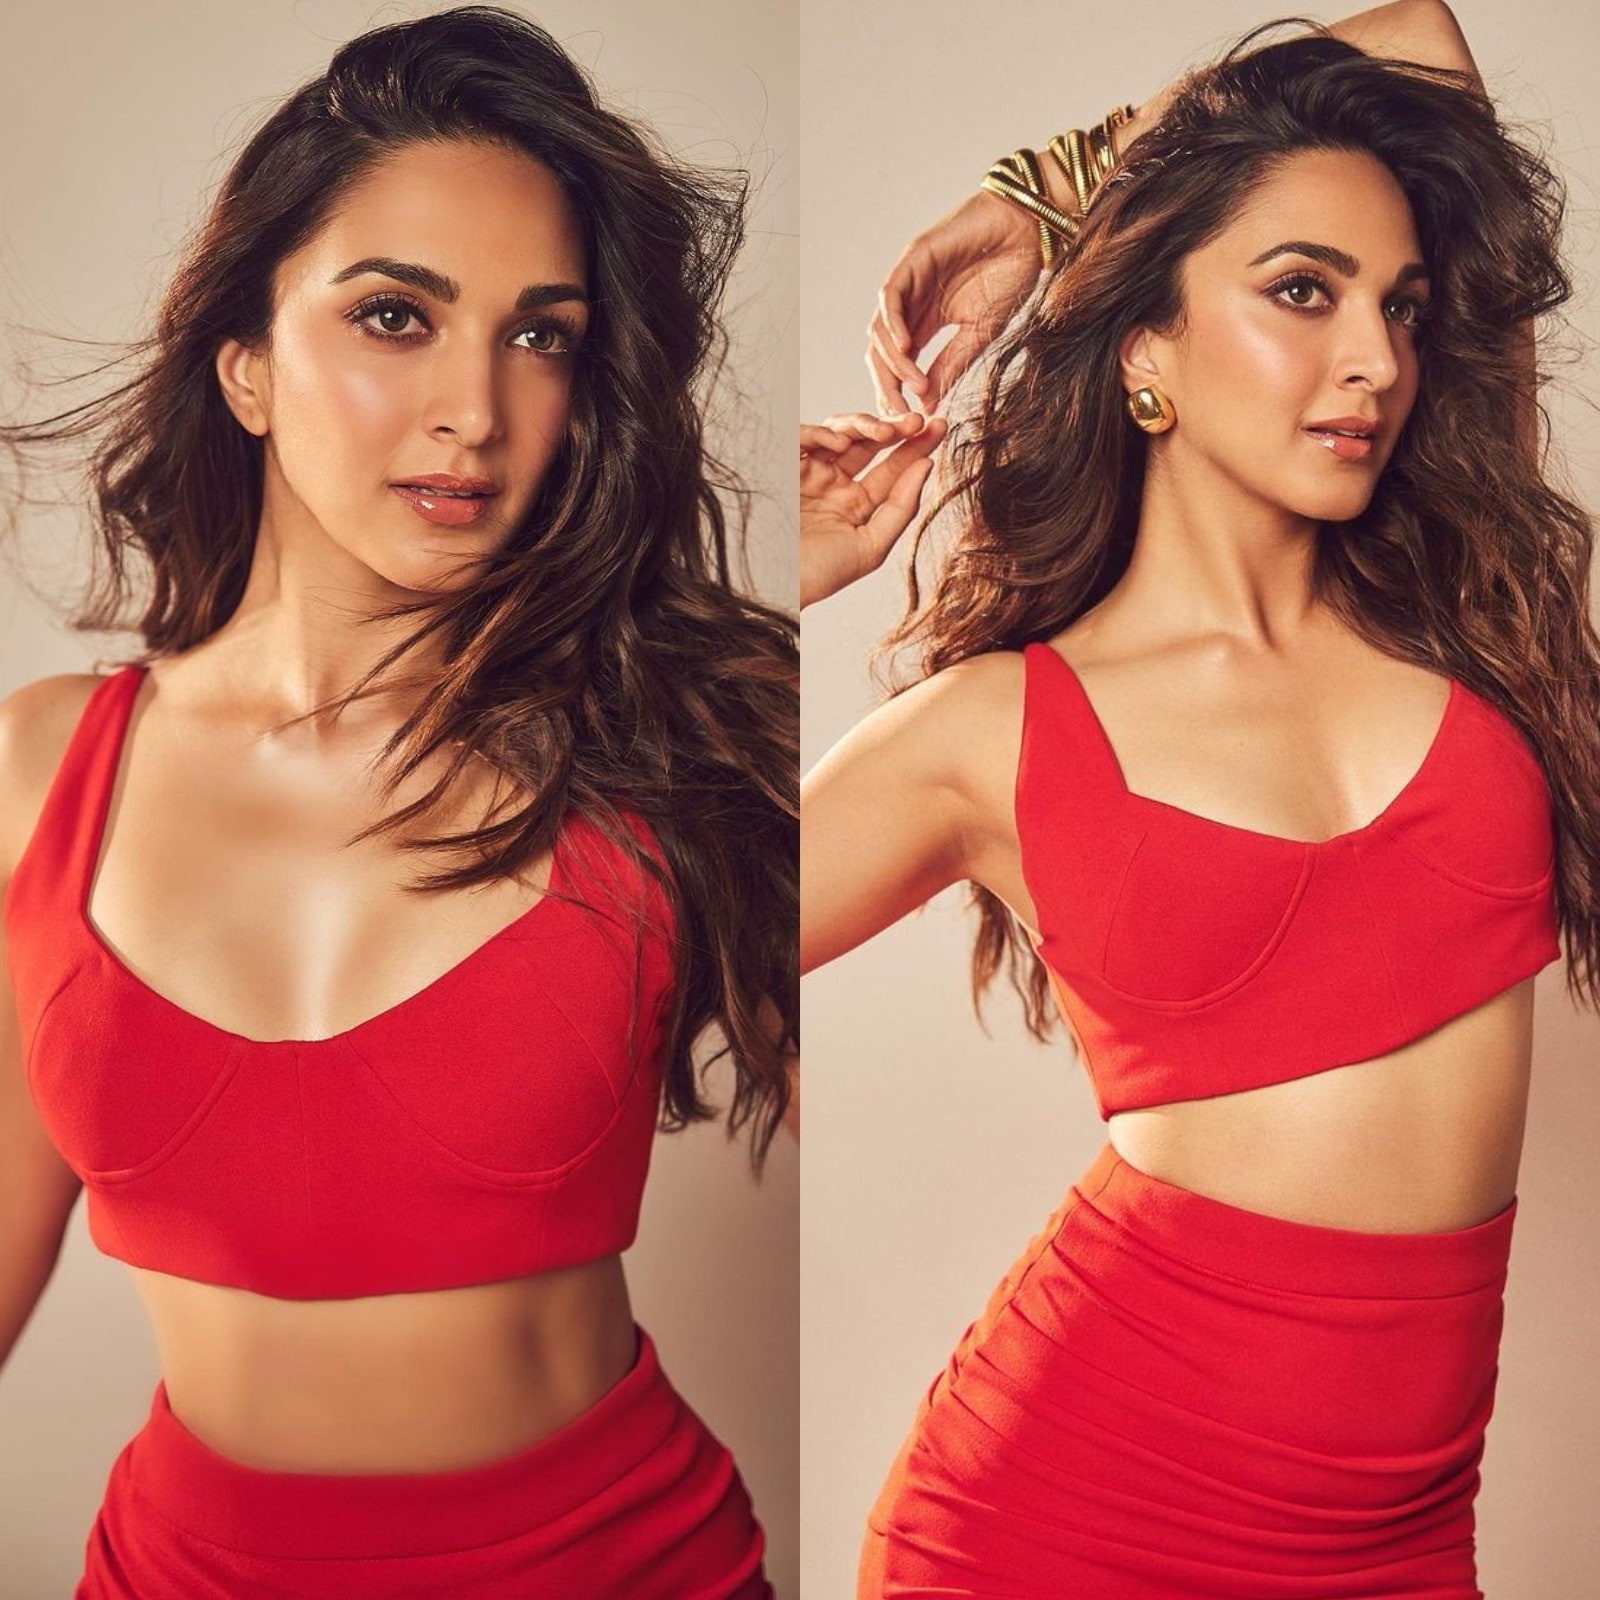 Kiara Advani's bralette and skirt are perfect to float through summer heat  : Bollywood News - Bollywood Hungama